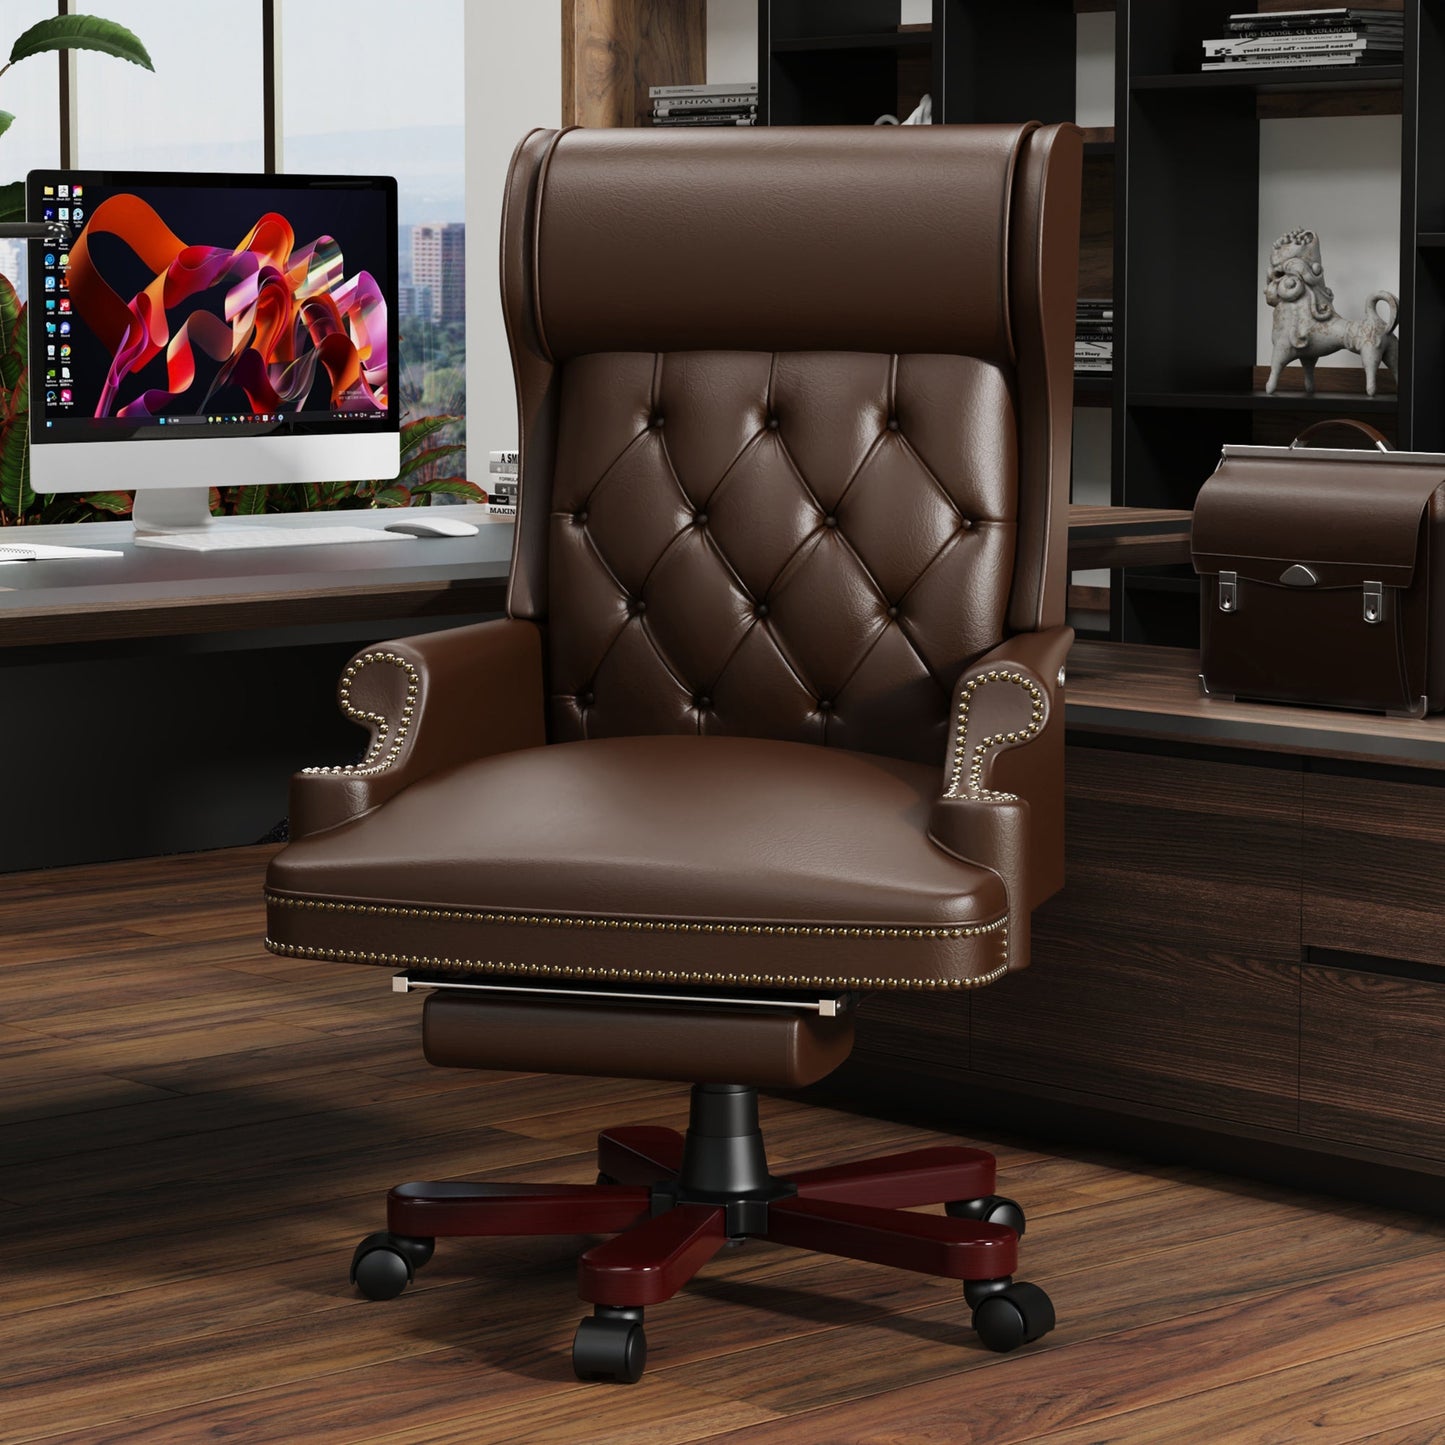 330LBS Executive Office Chair with Footstool, Ergonomic Design High Back Reclining Comfortable Desk Chair - Brown